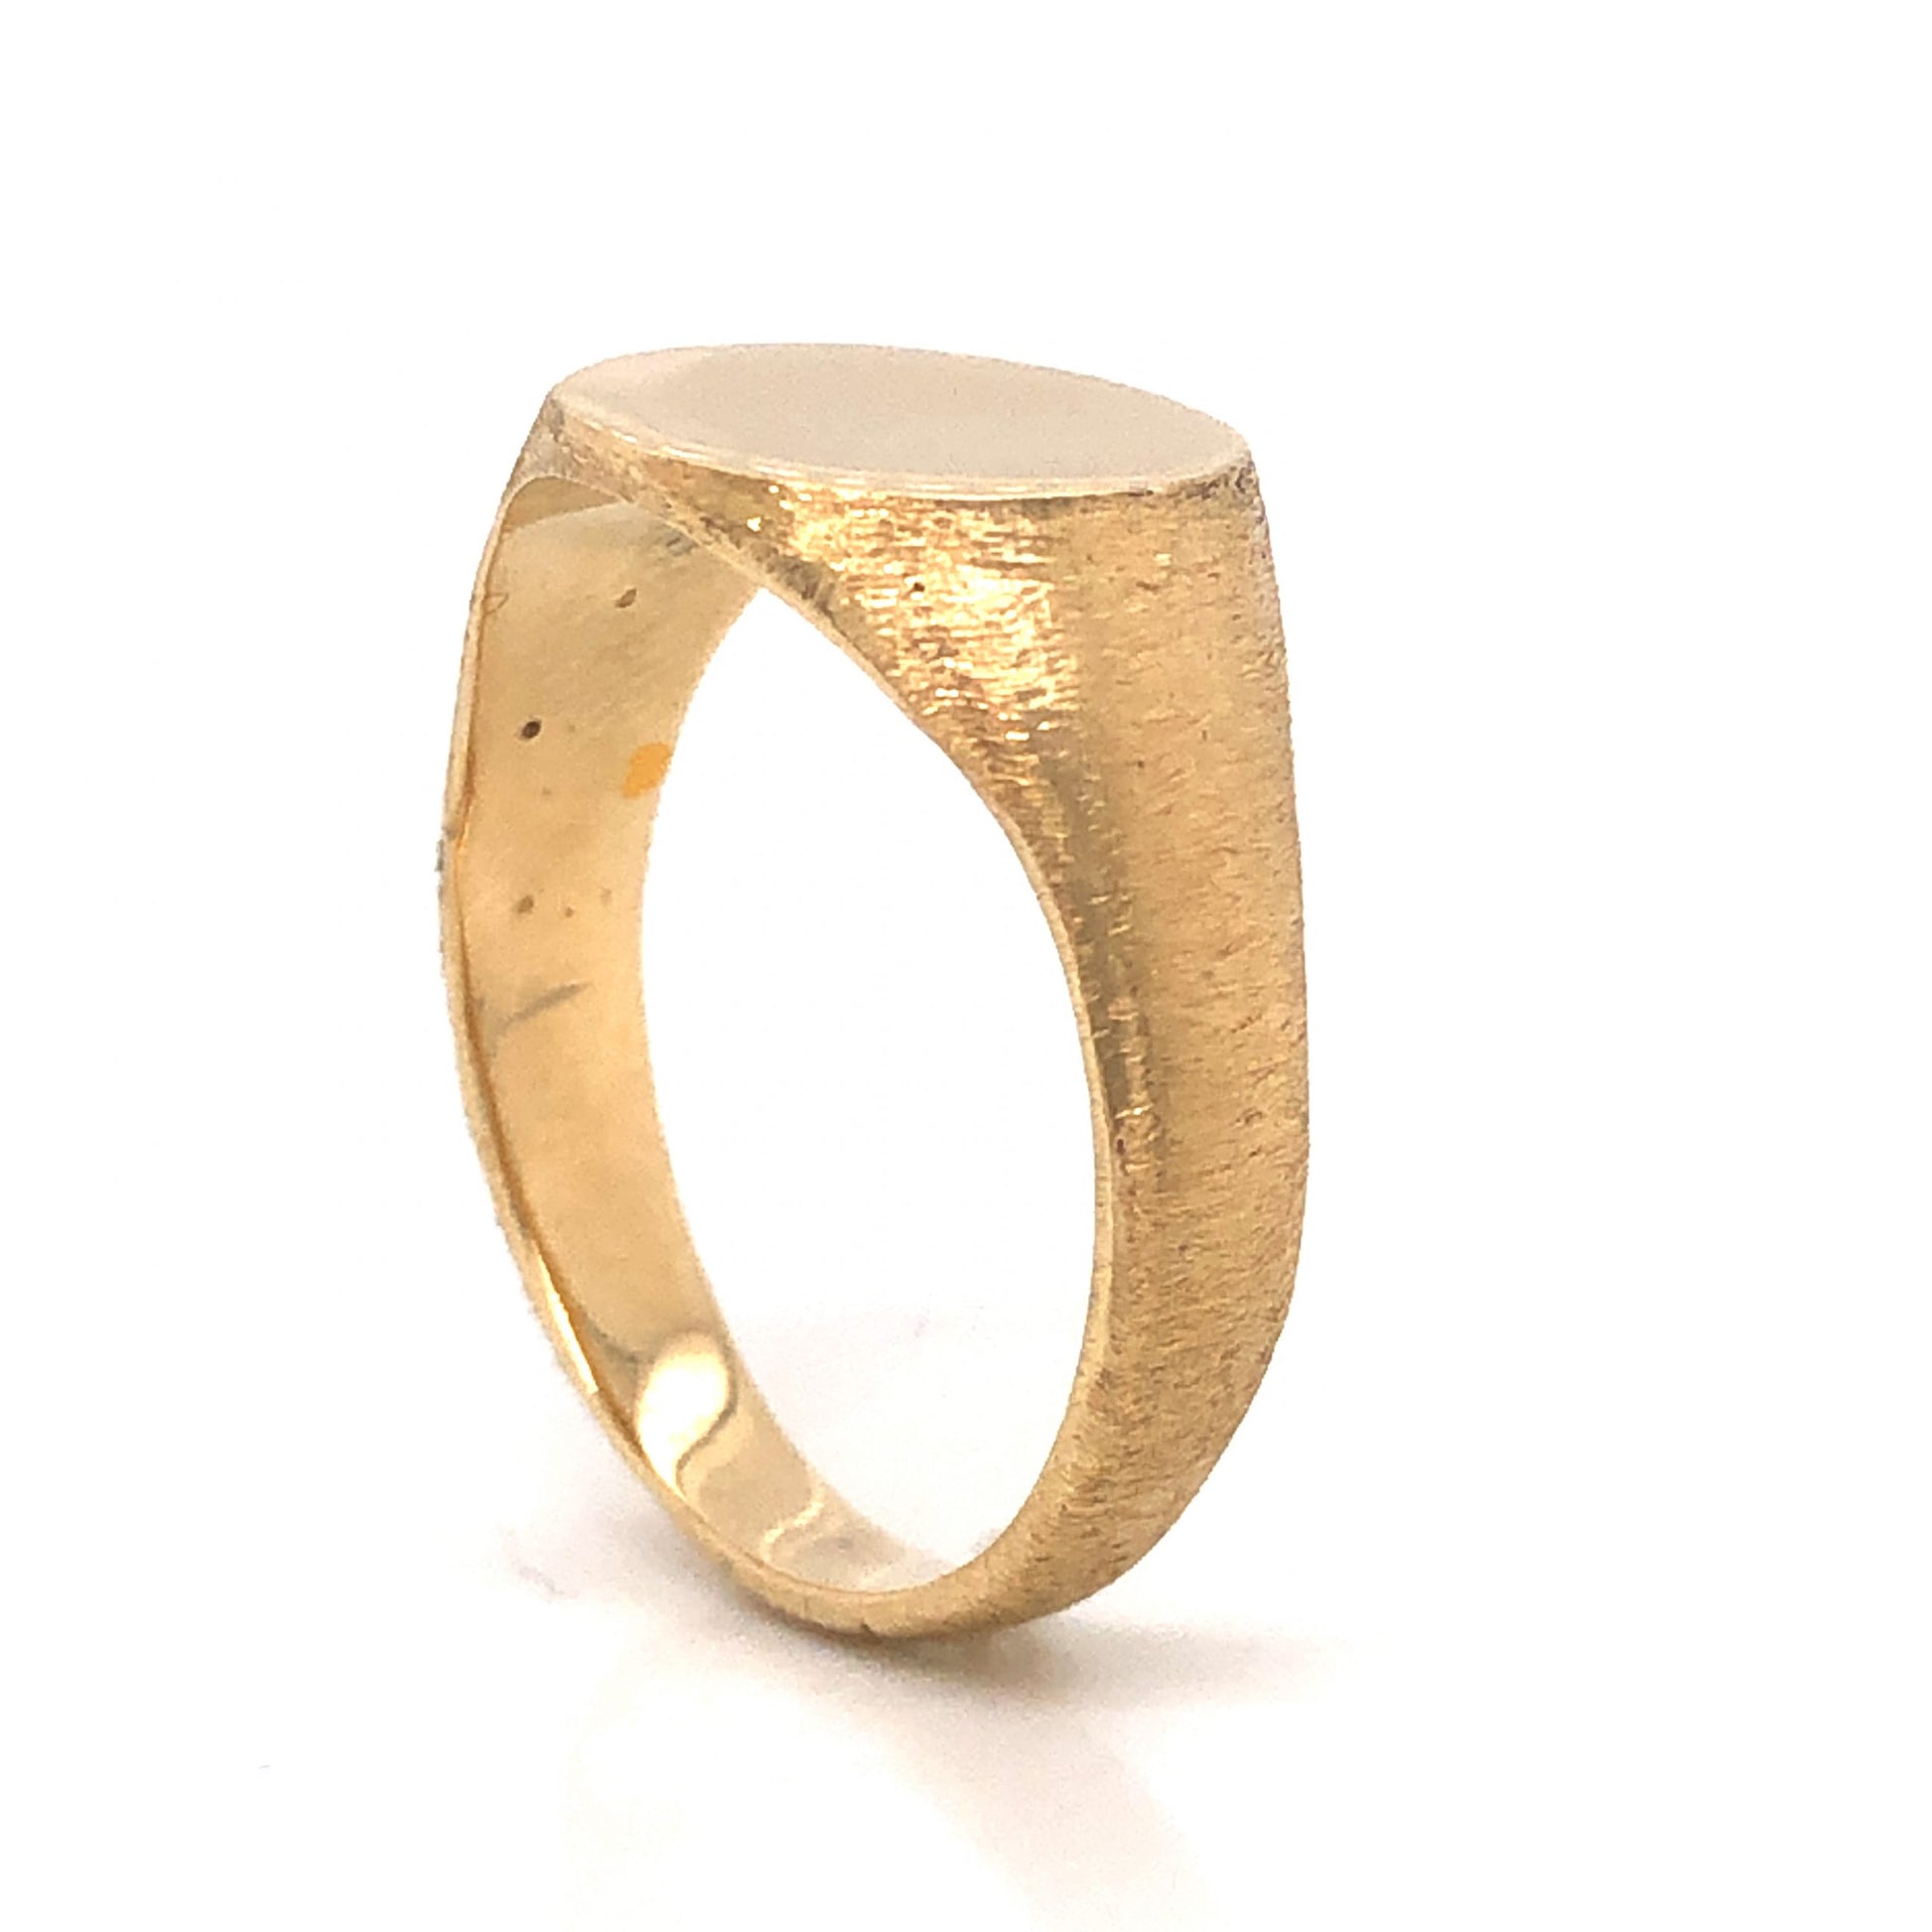 Mid-Century Round Signet Ring in 14k Yellow GoldComposition: 14 Karat Yellow Gold Ring Size: 8 Total Gram Weight: 5.0 g